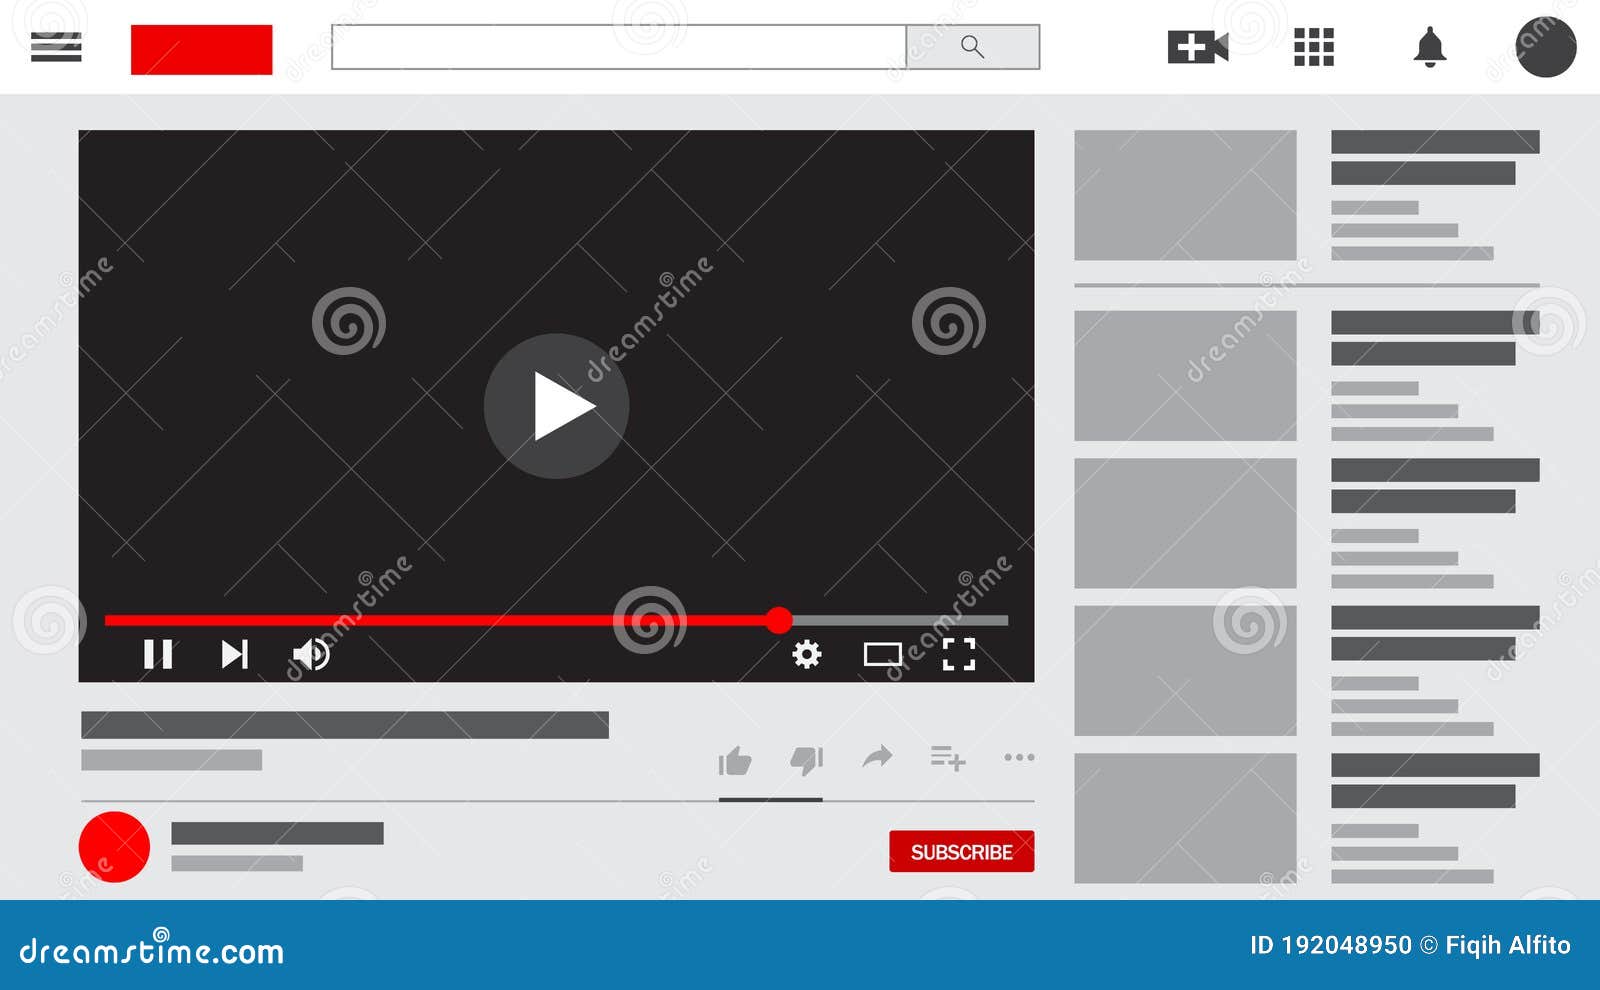 youtube interface or layout, youtube video player, easy layers and easy to edit. 4k resolution